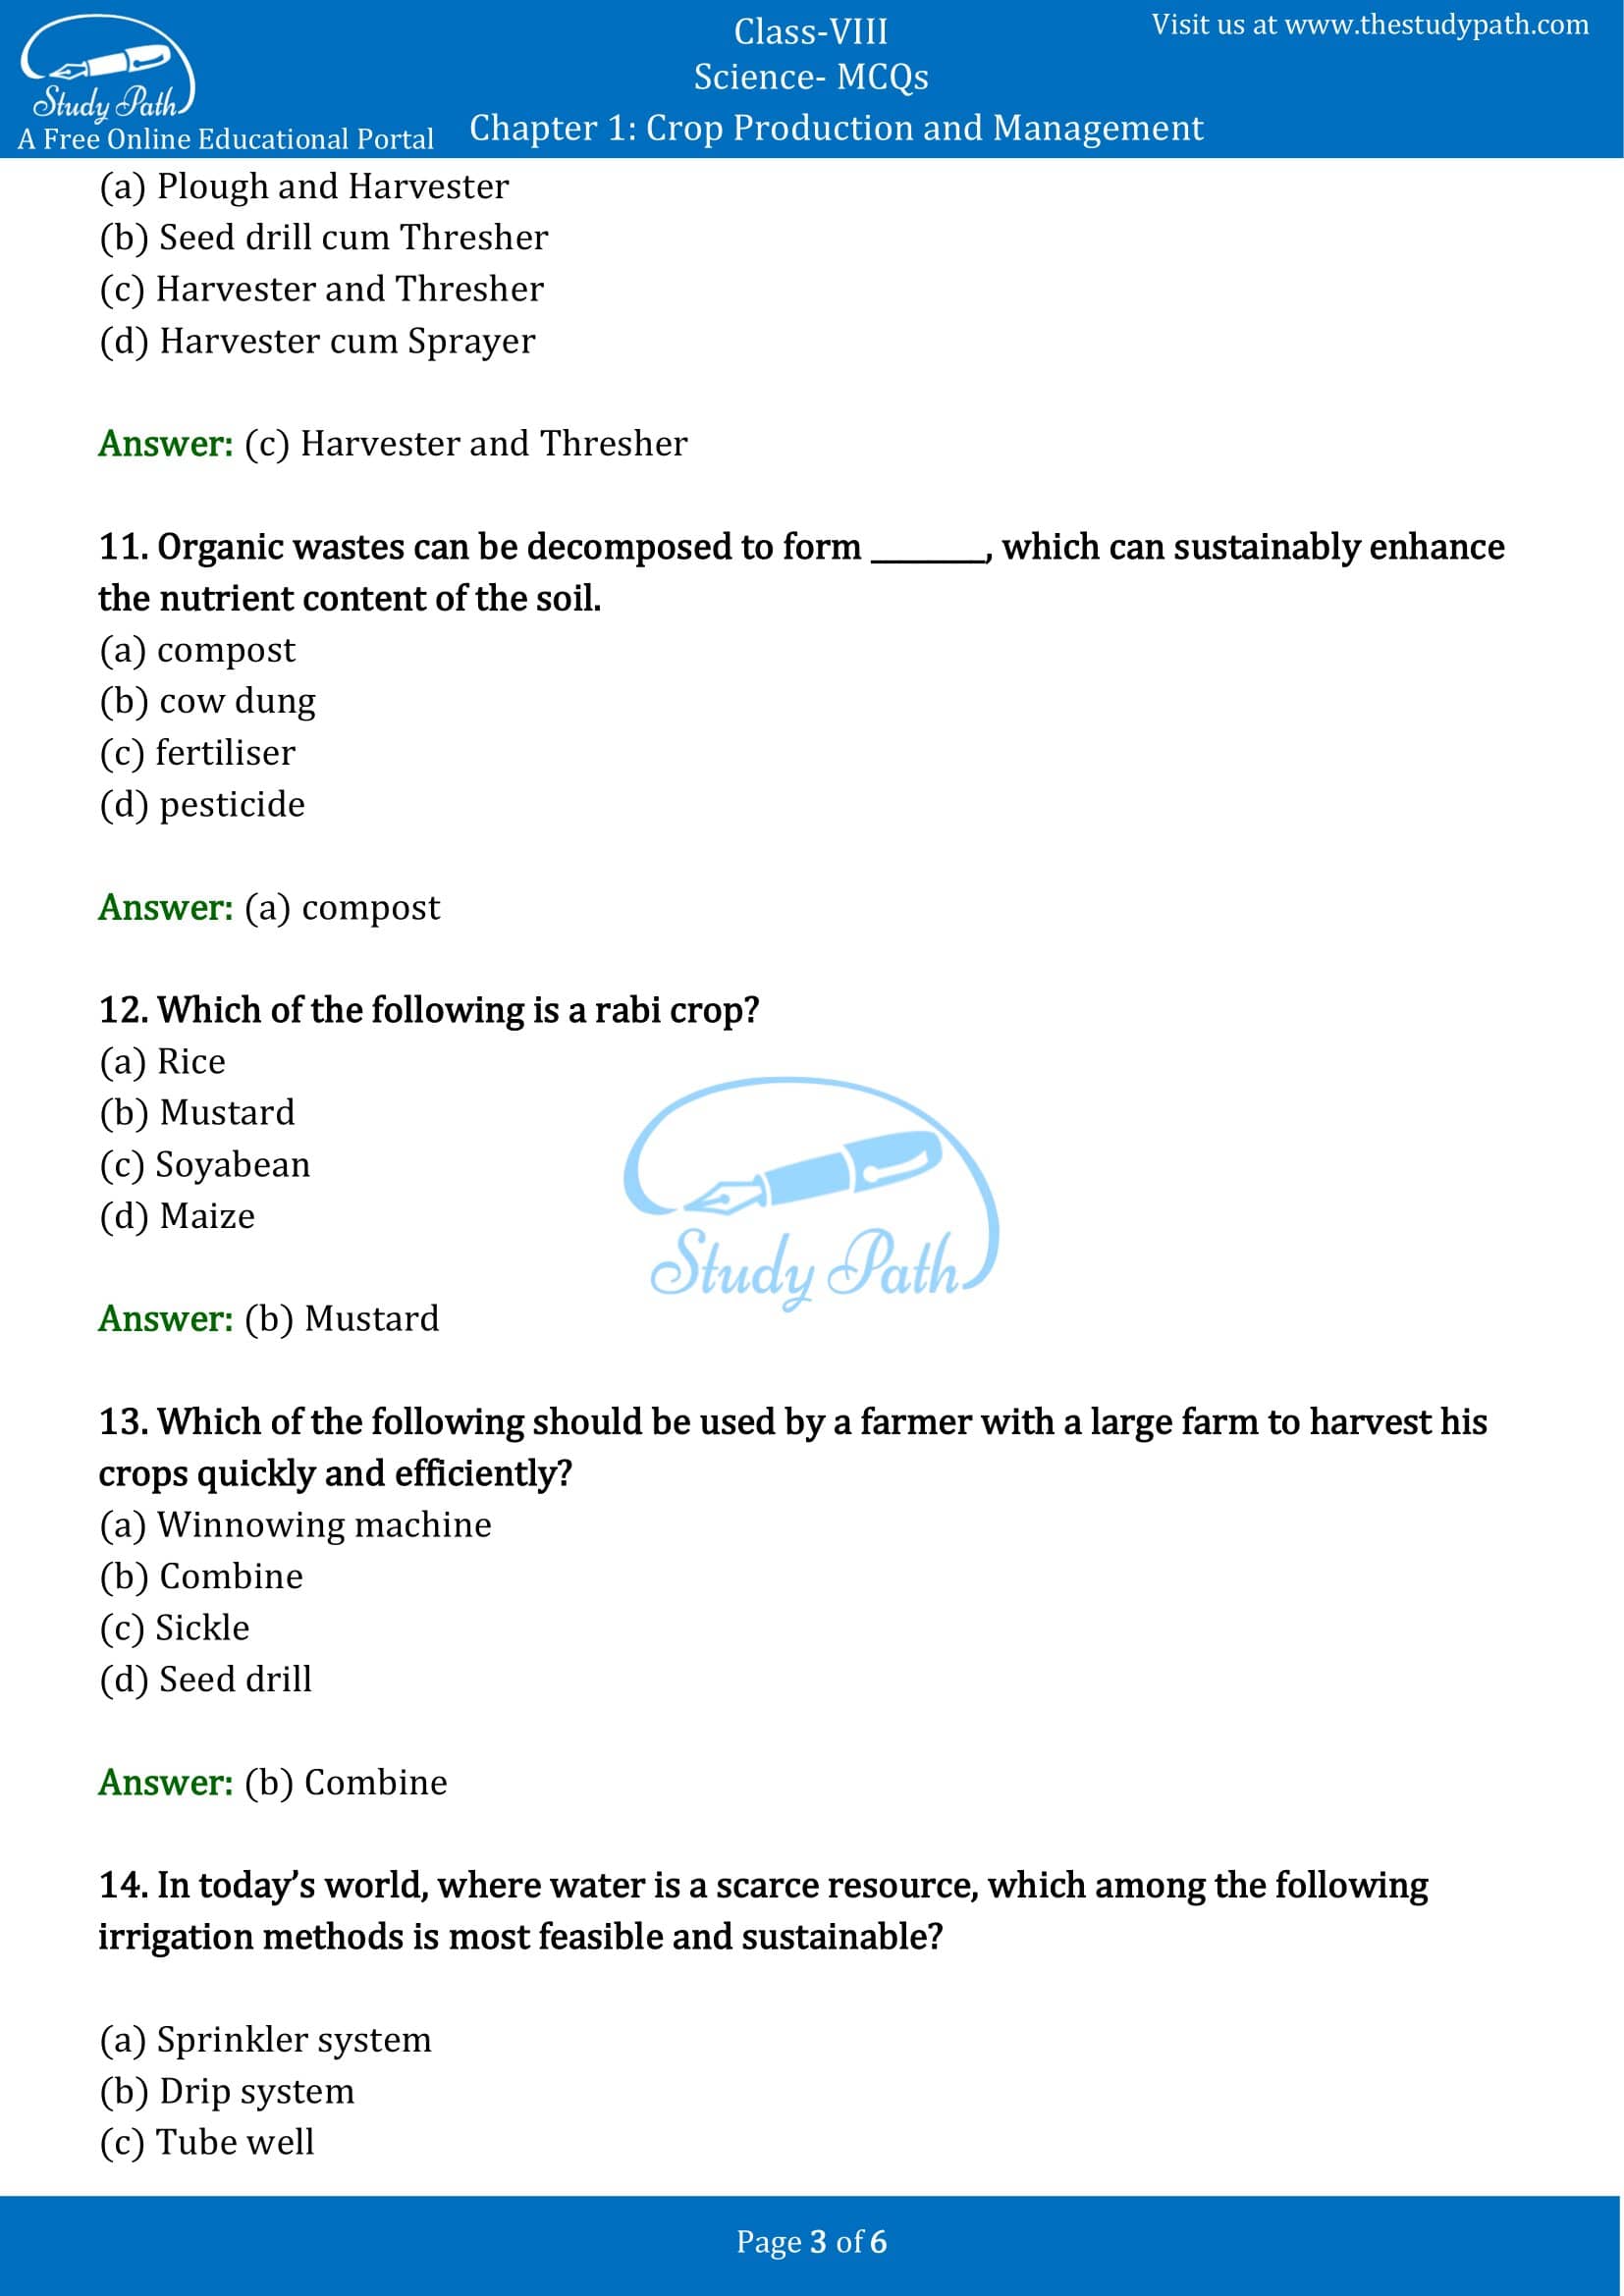 case study questions of crop production and management class 8